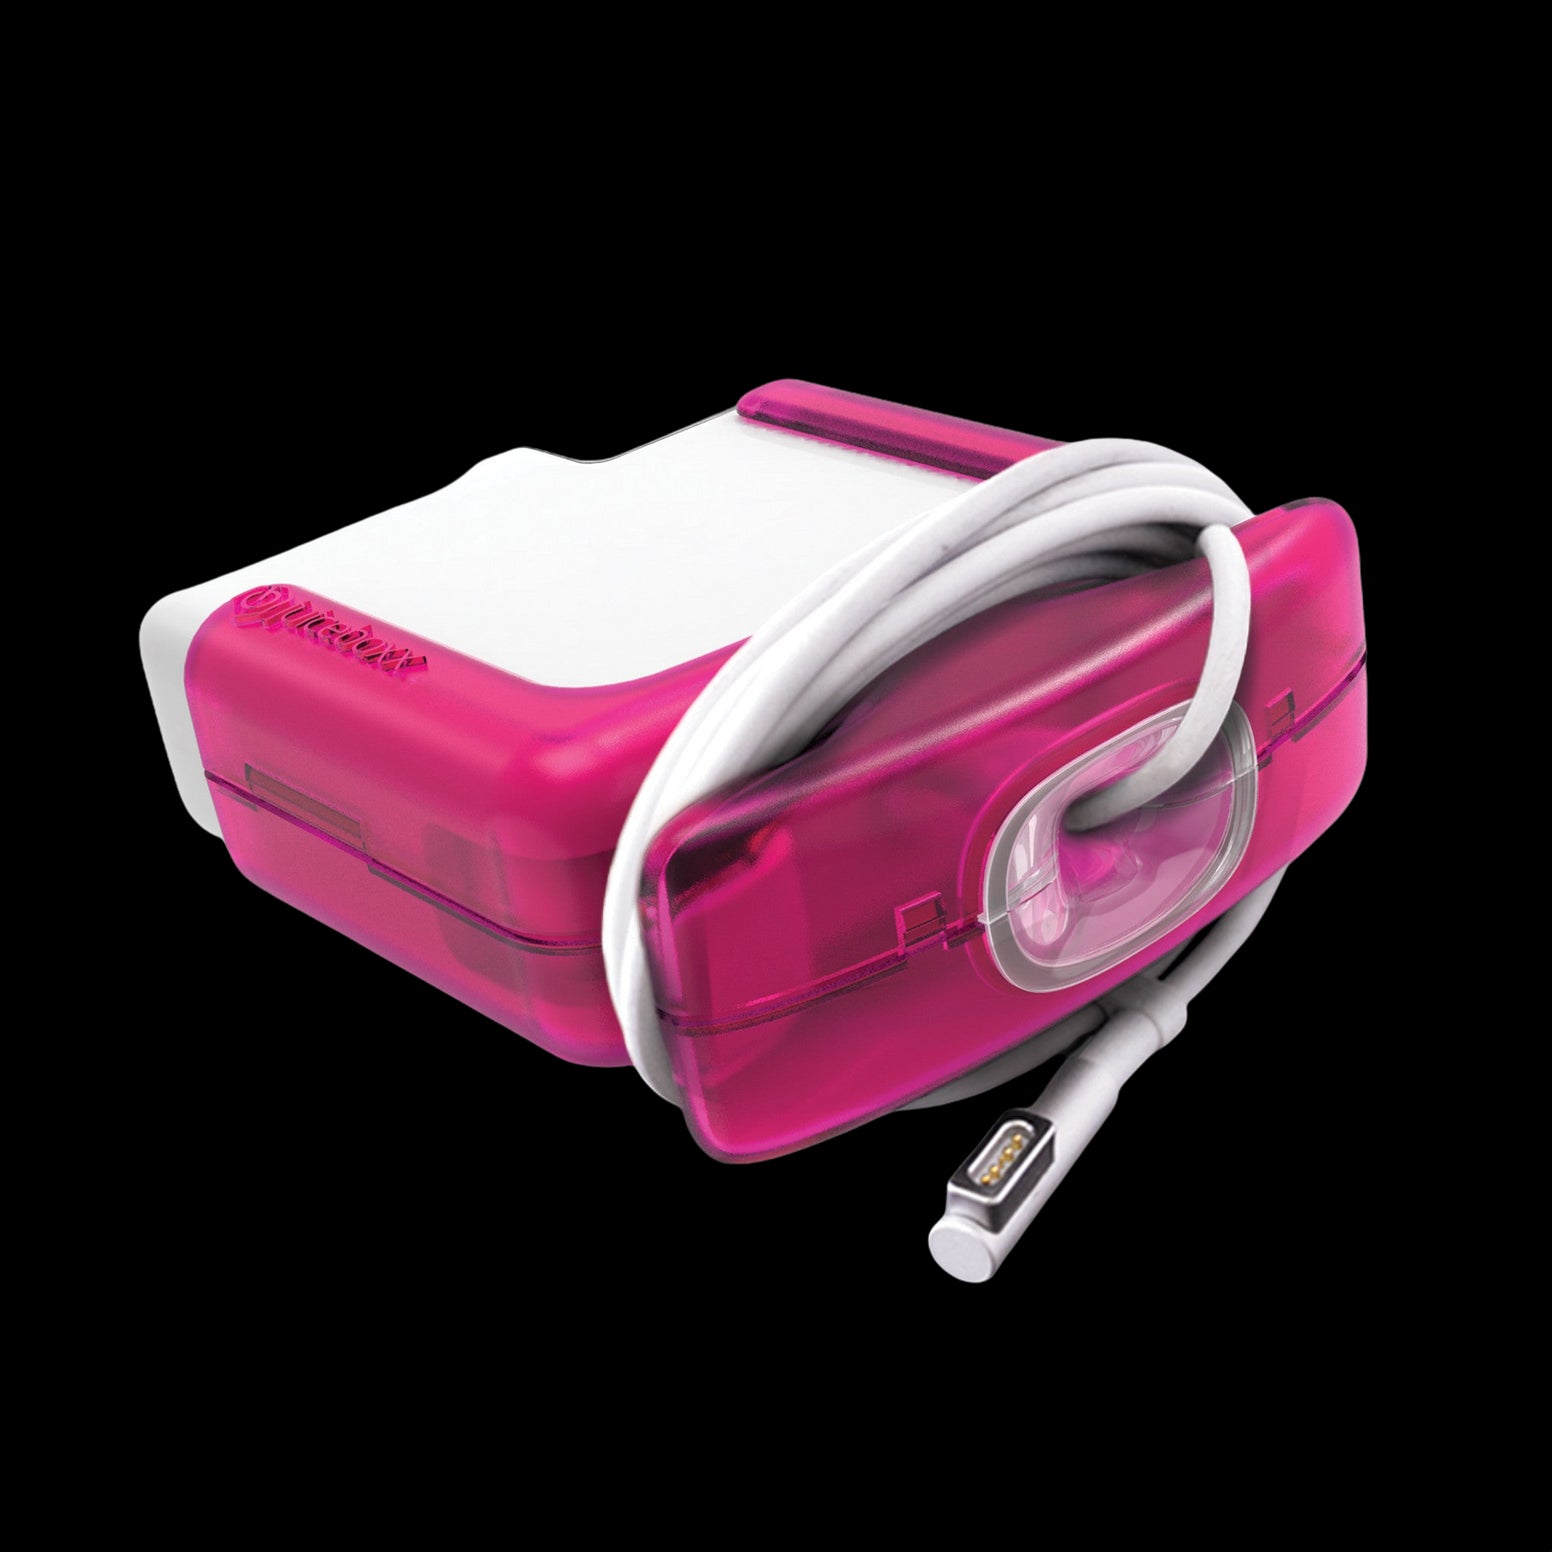 Juiceboxx Charger Case (for 45w Apple Power Adapter/Charger) - Magenta